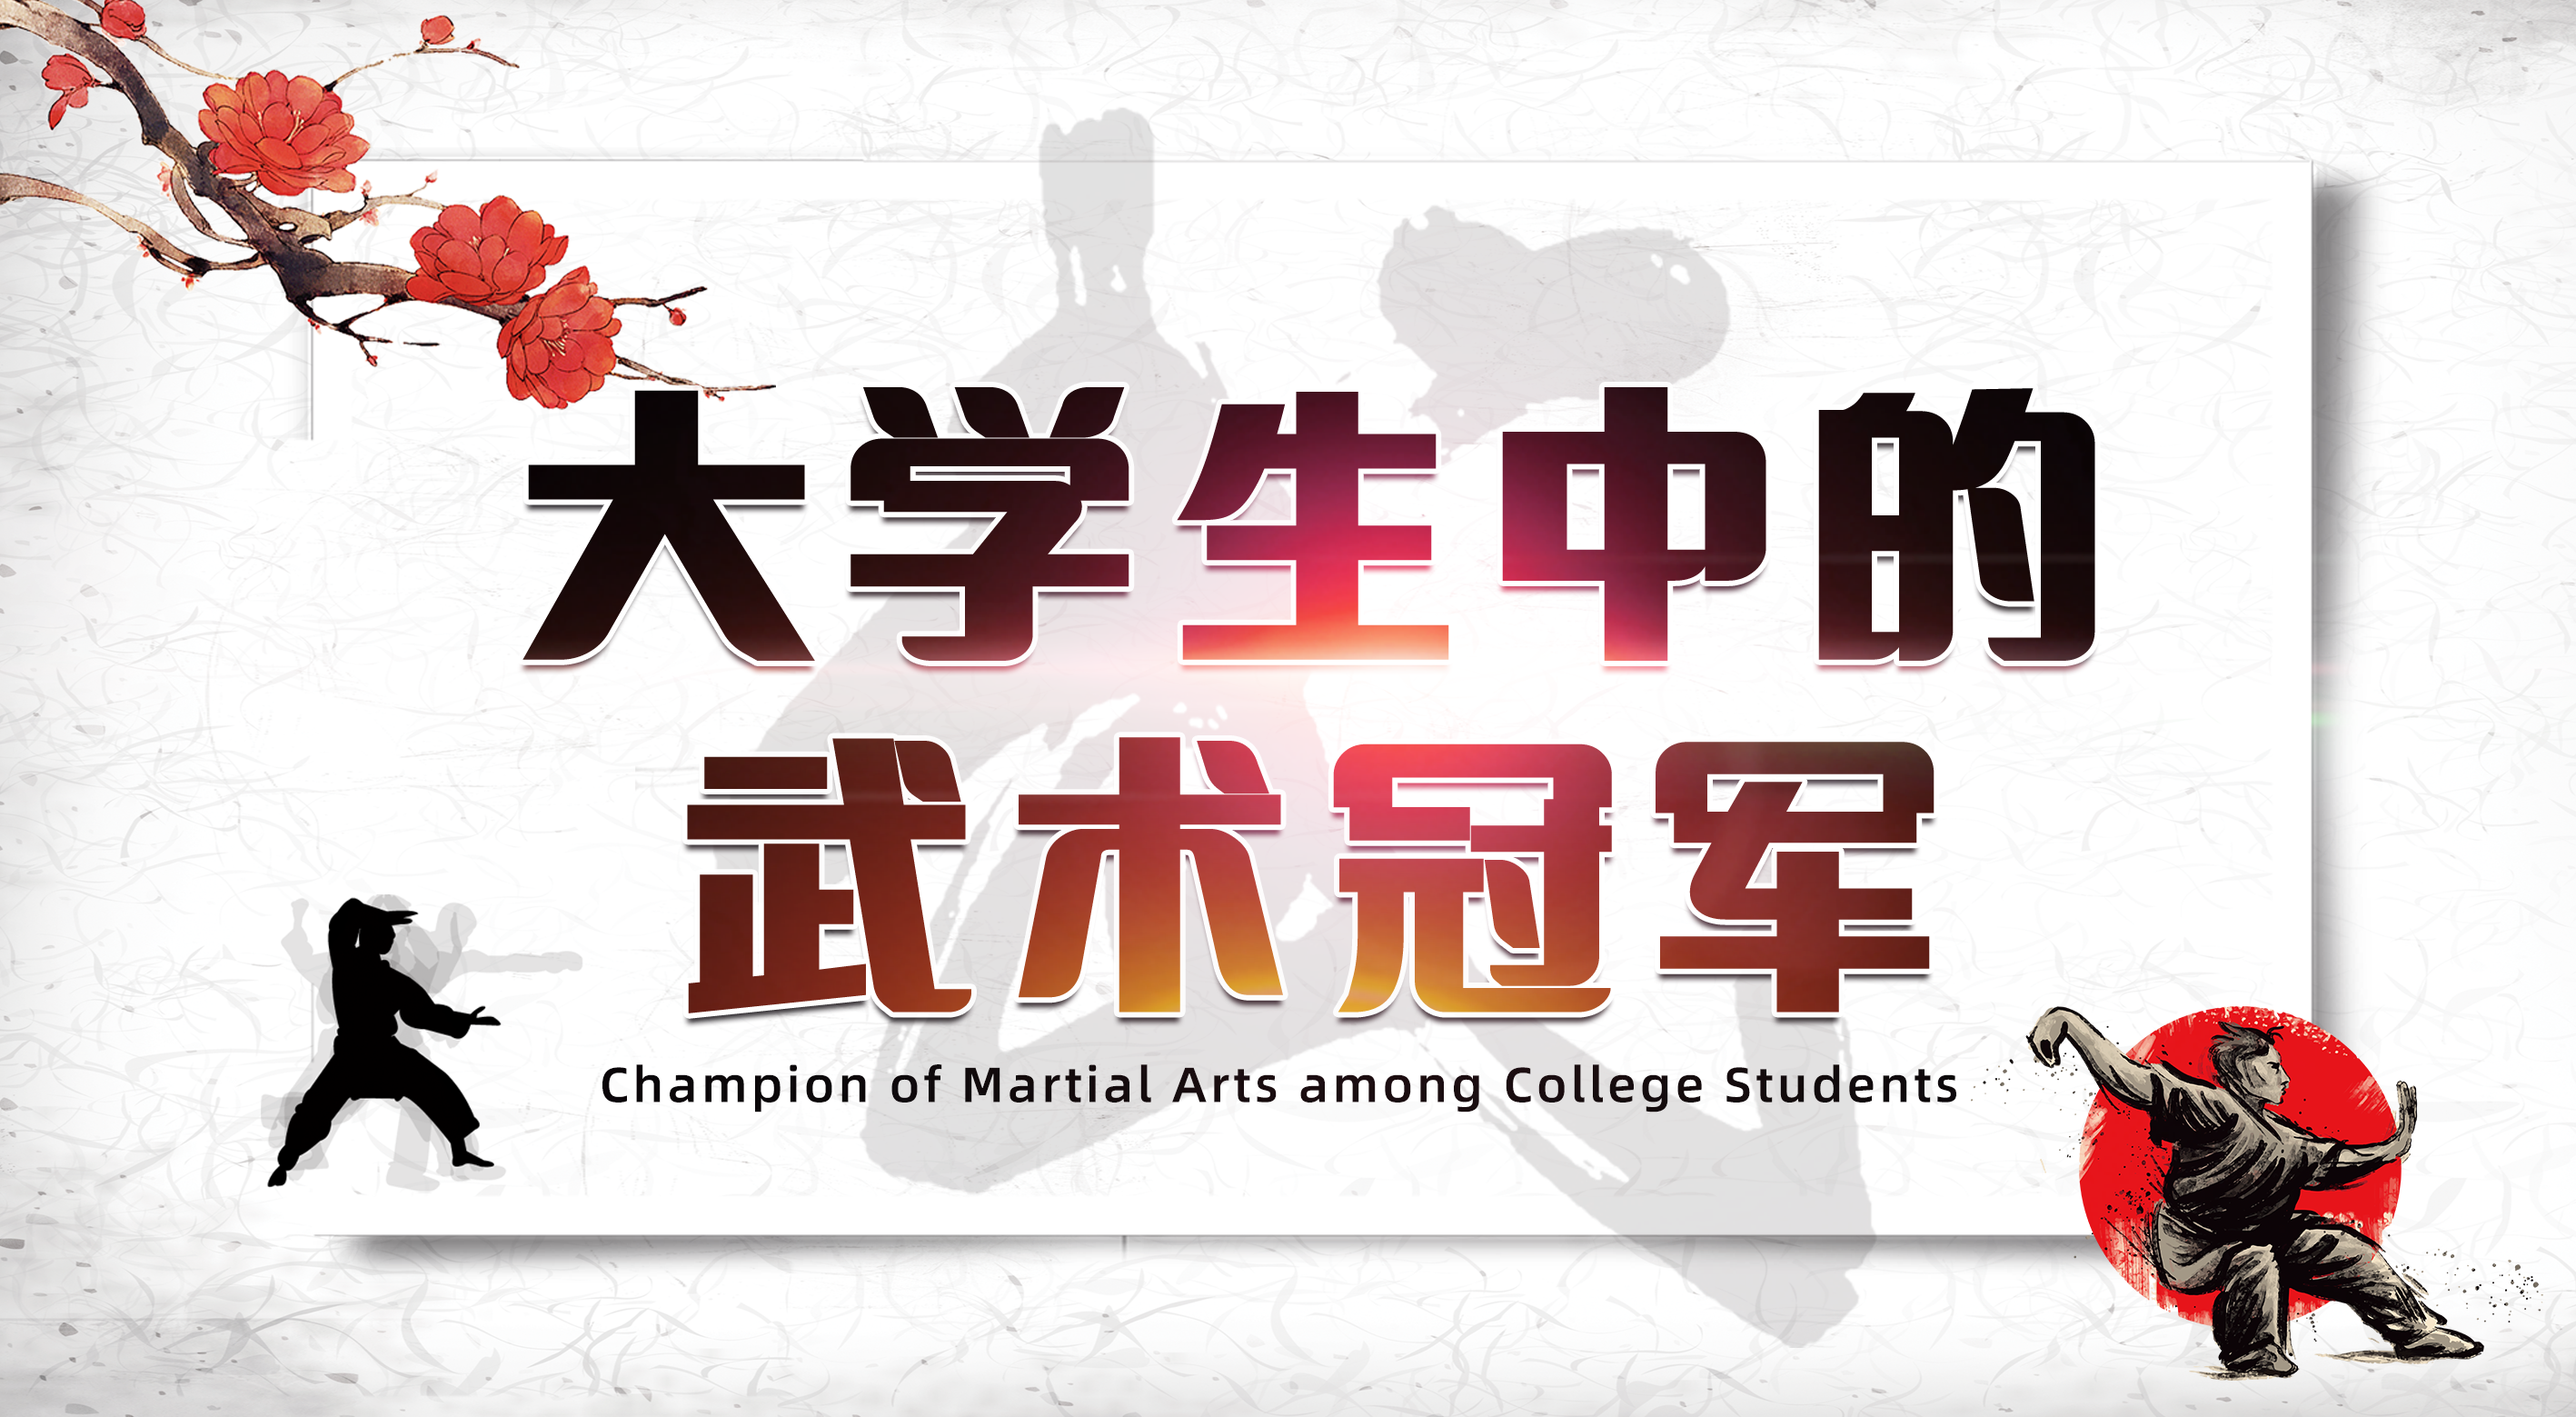 Champion of Martial Arts among College Students